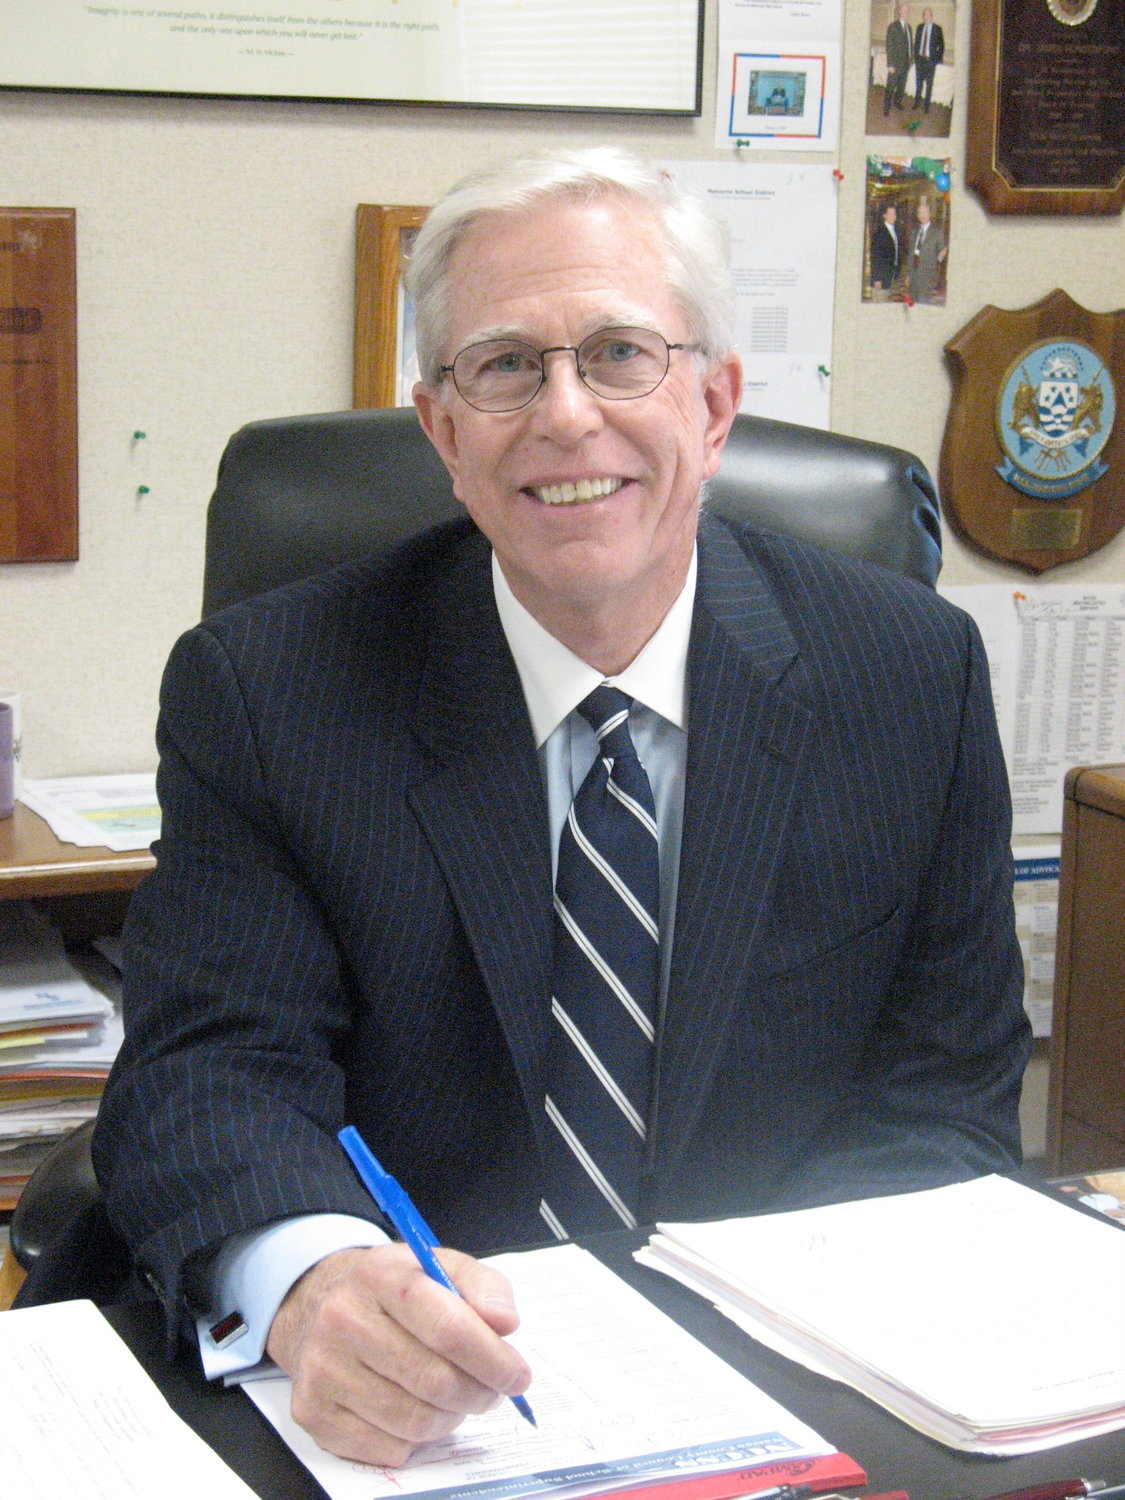 Malverne School District Superintendent Dr. James Hunderfund, who has been an educator for nearly 50 years, will retire at the end of the 2019-20 school year.